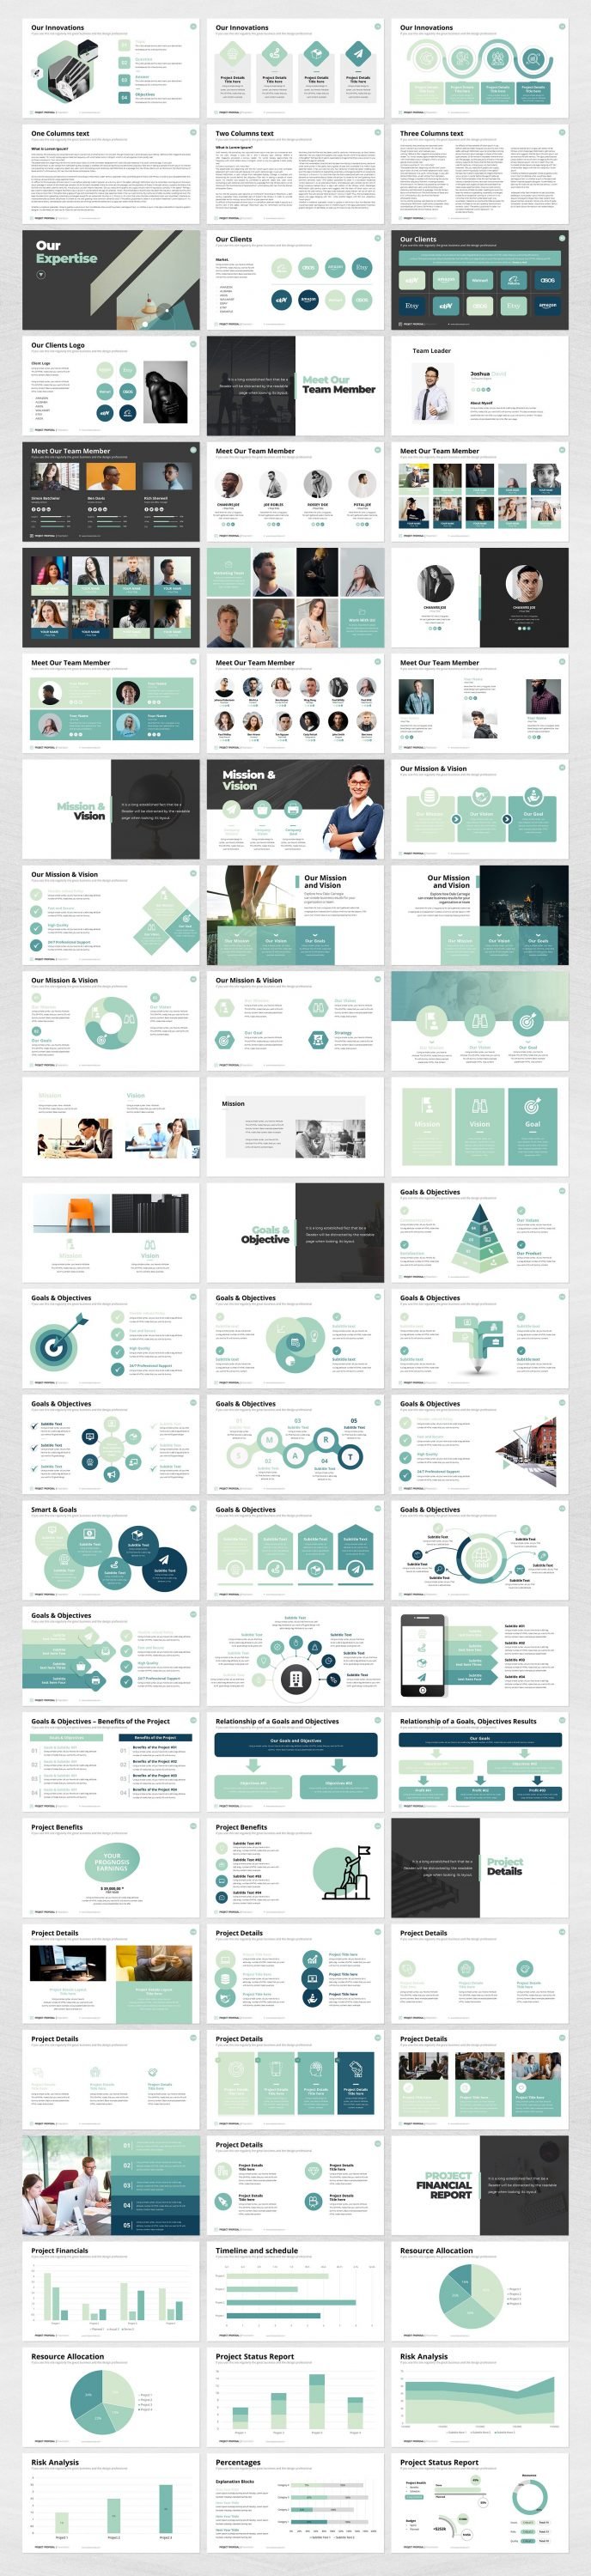 The template contains a whole collection of infographics and diagrams to simplify the communication of information.